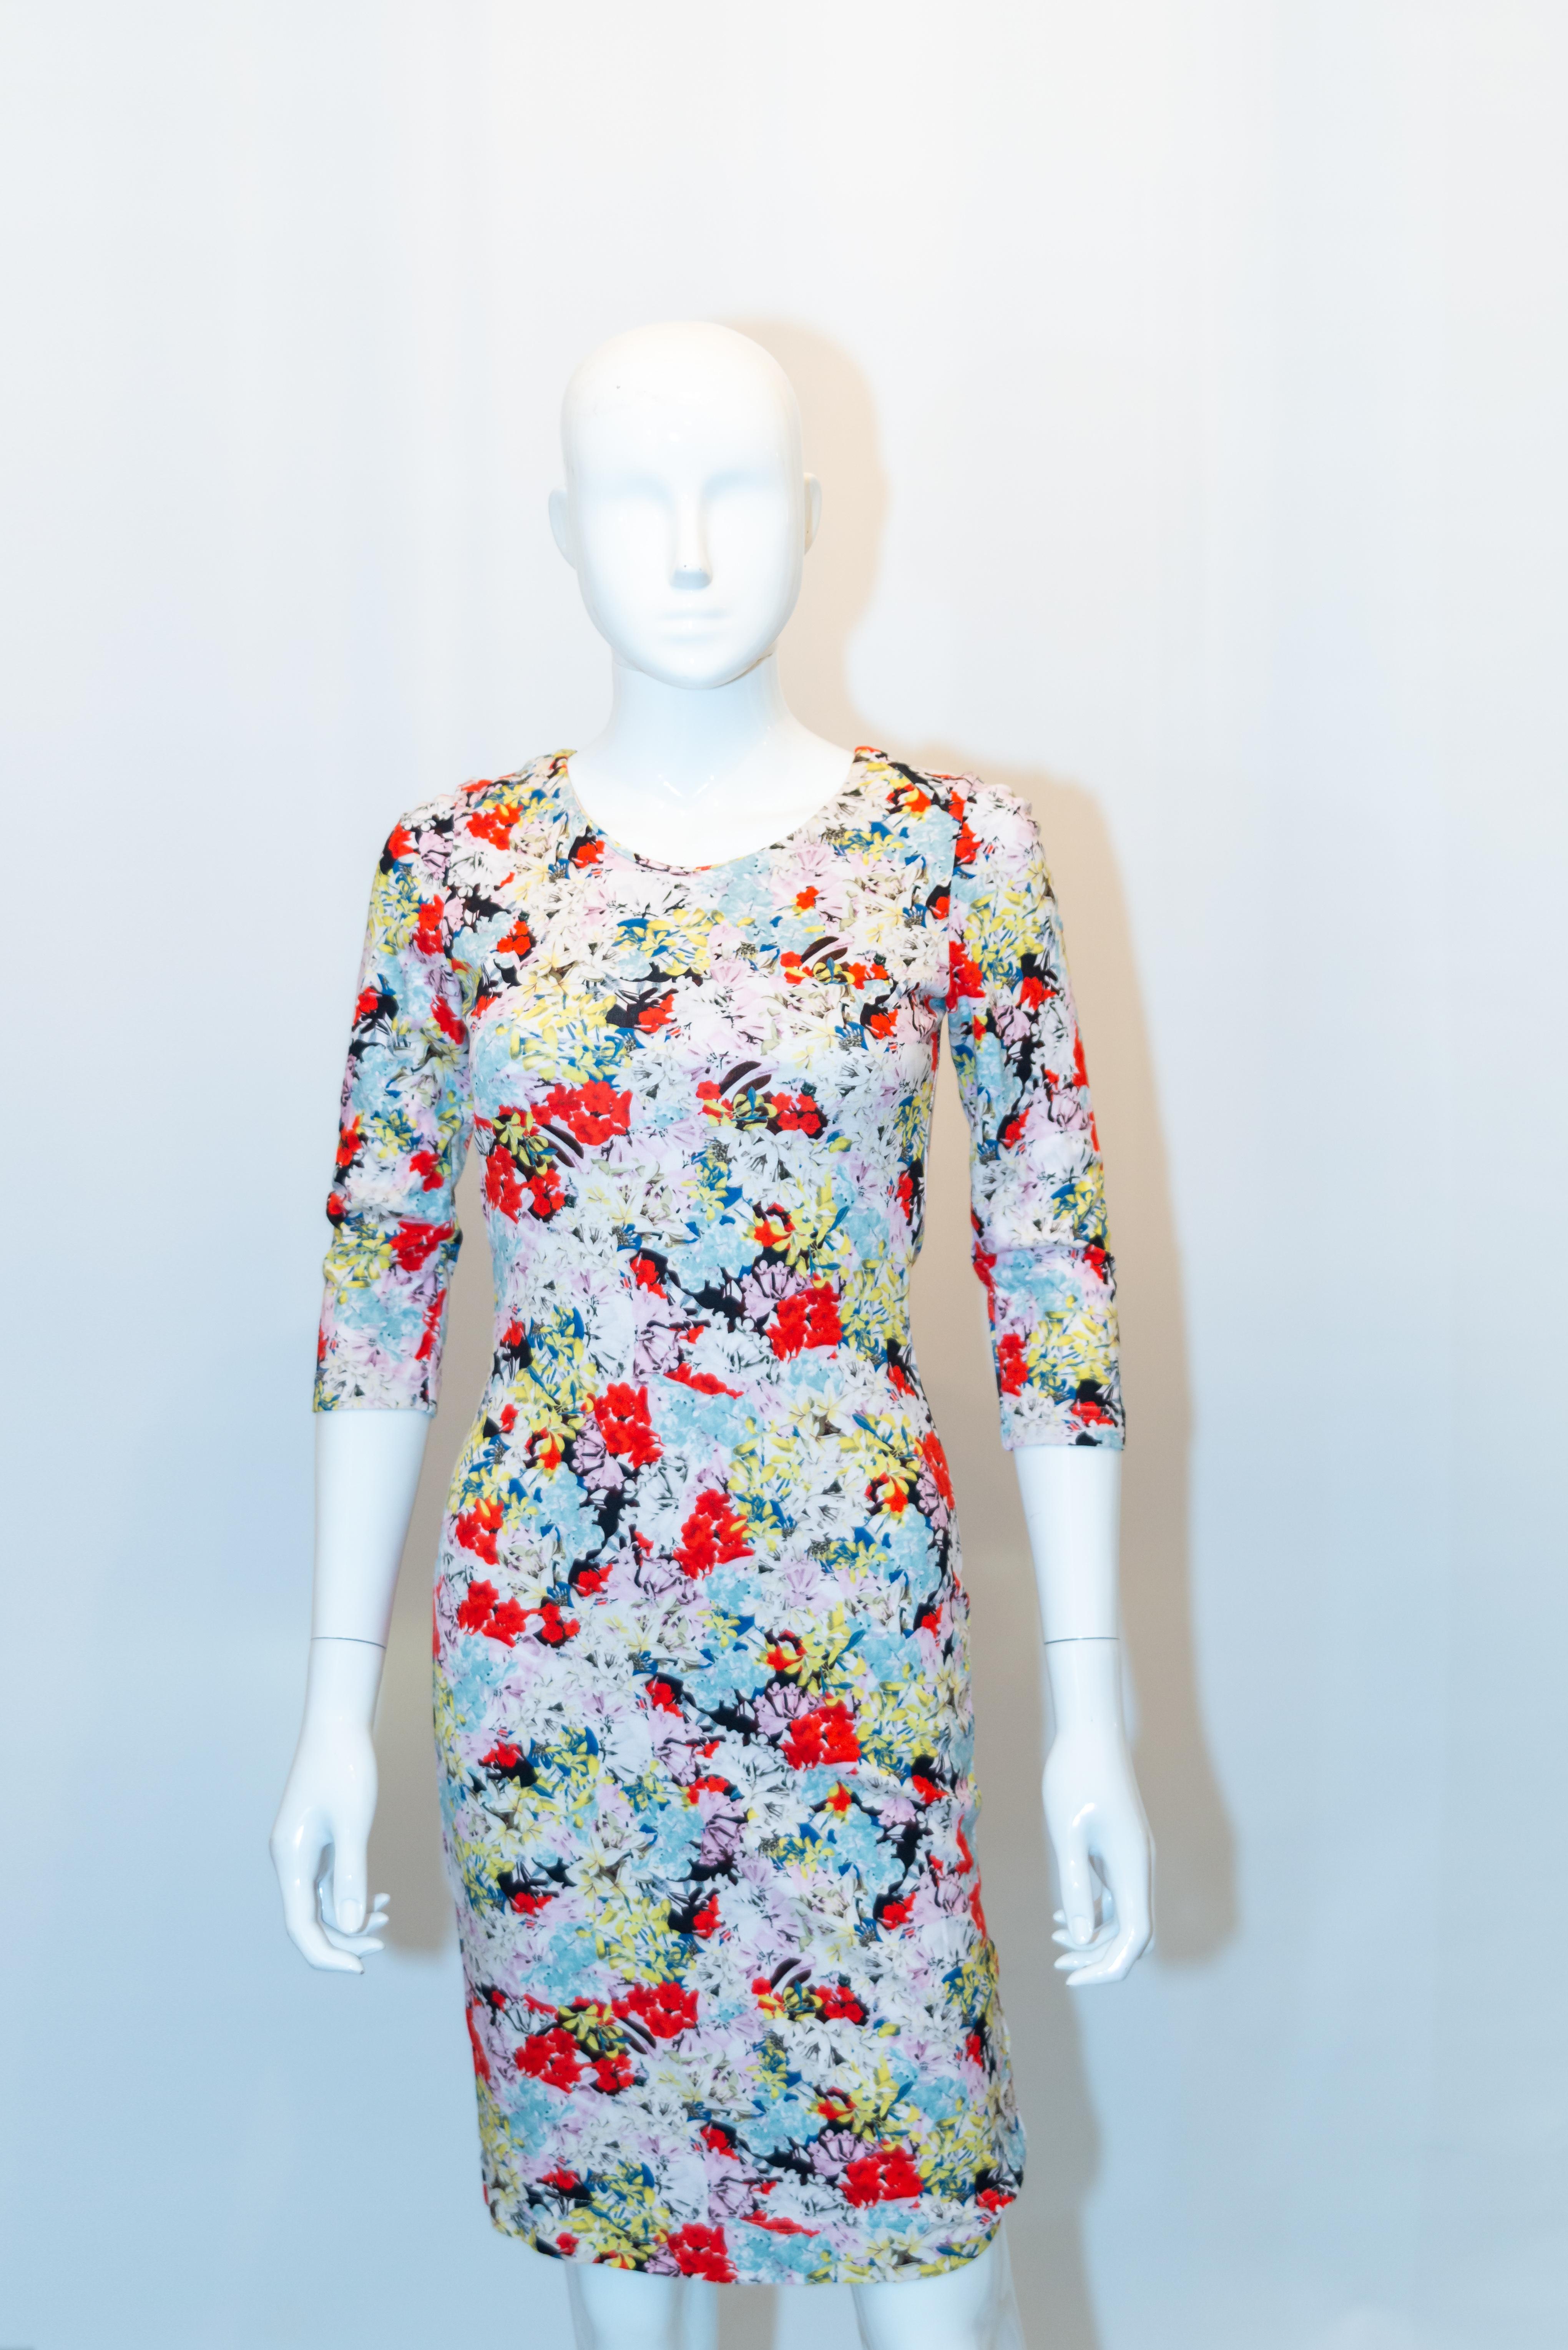 A great dress for Sping / Summer by Erdem . The dress is in cotton/ lycra mix in a floral print., and is shaped with elbow length sleaves . The upper area is lined. Size 8 Measurements: Bust 33'', length 37''